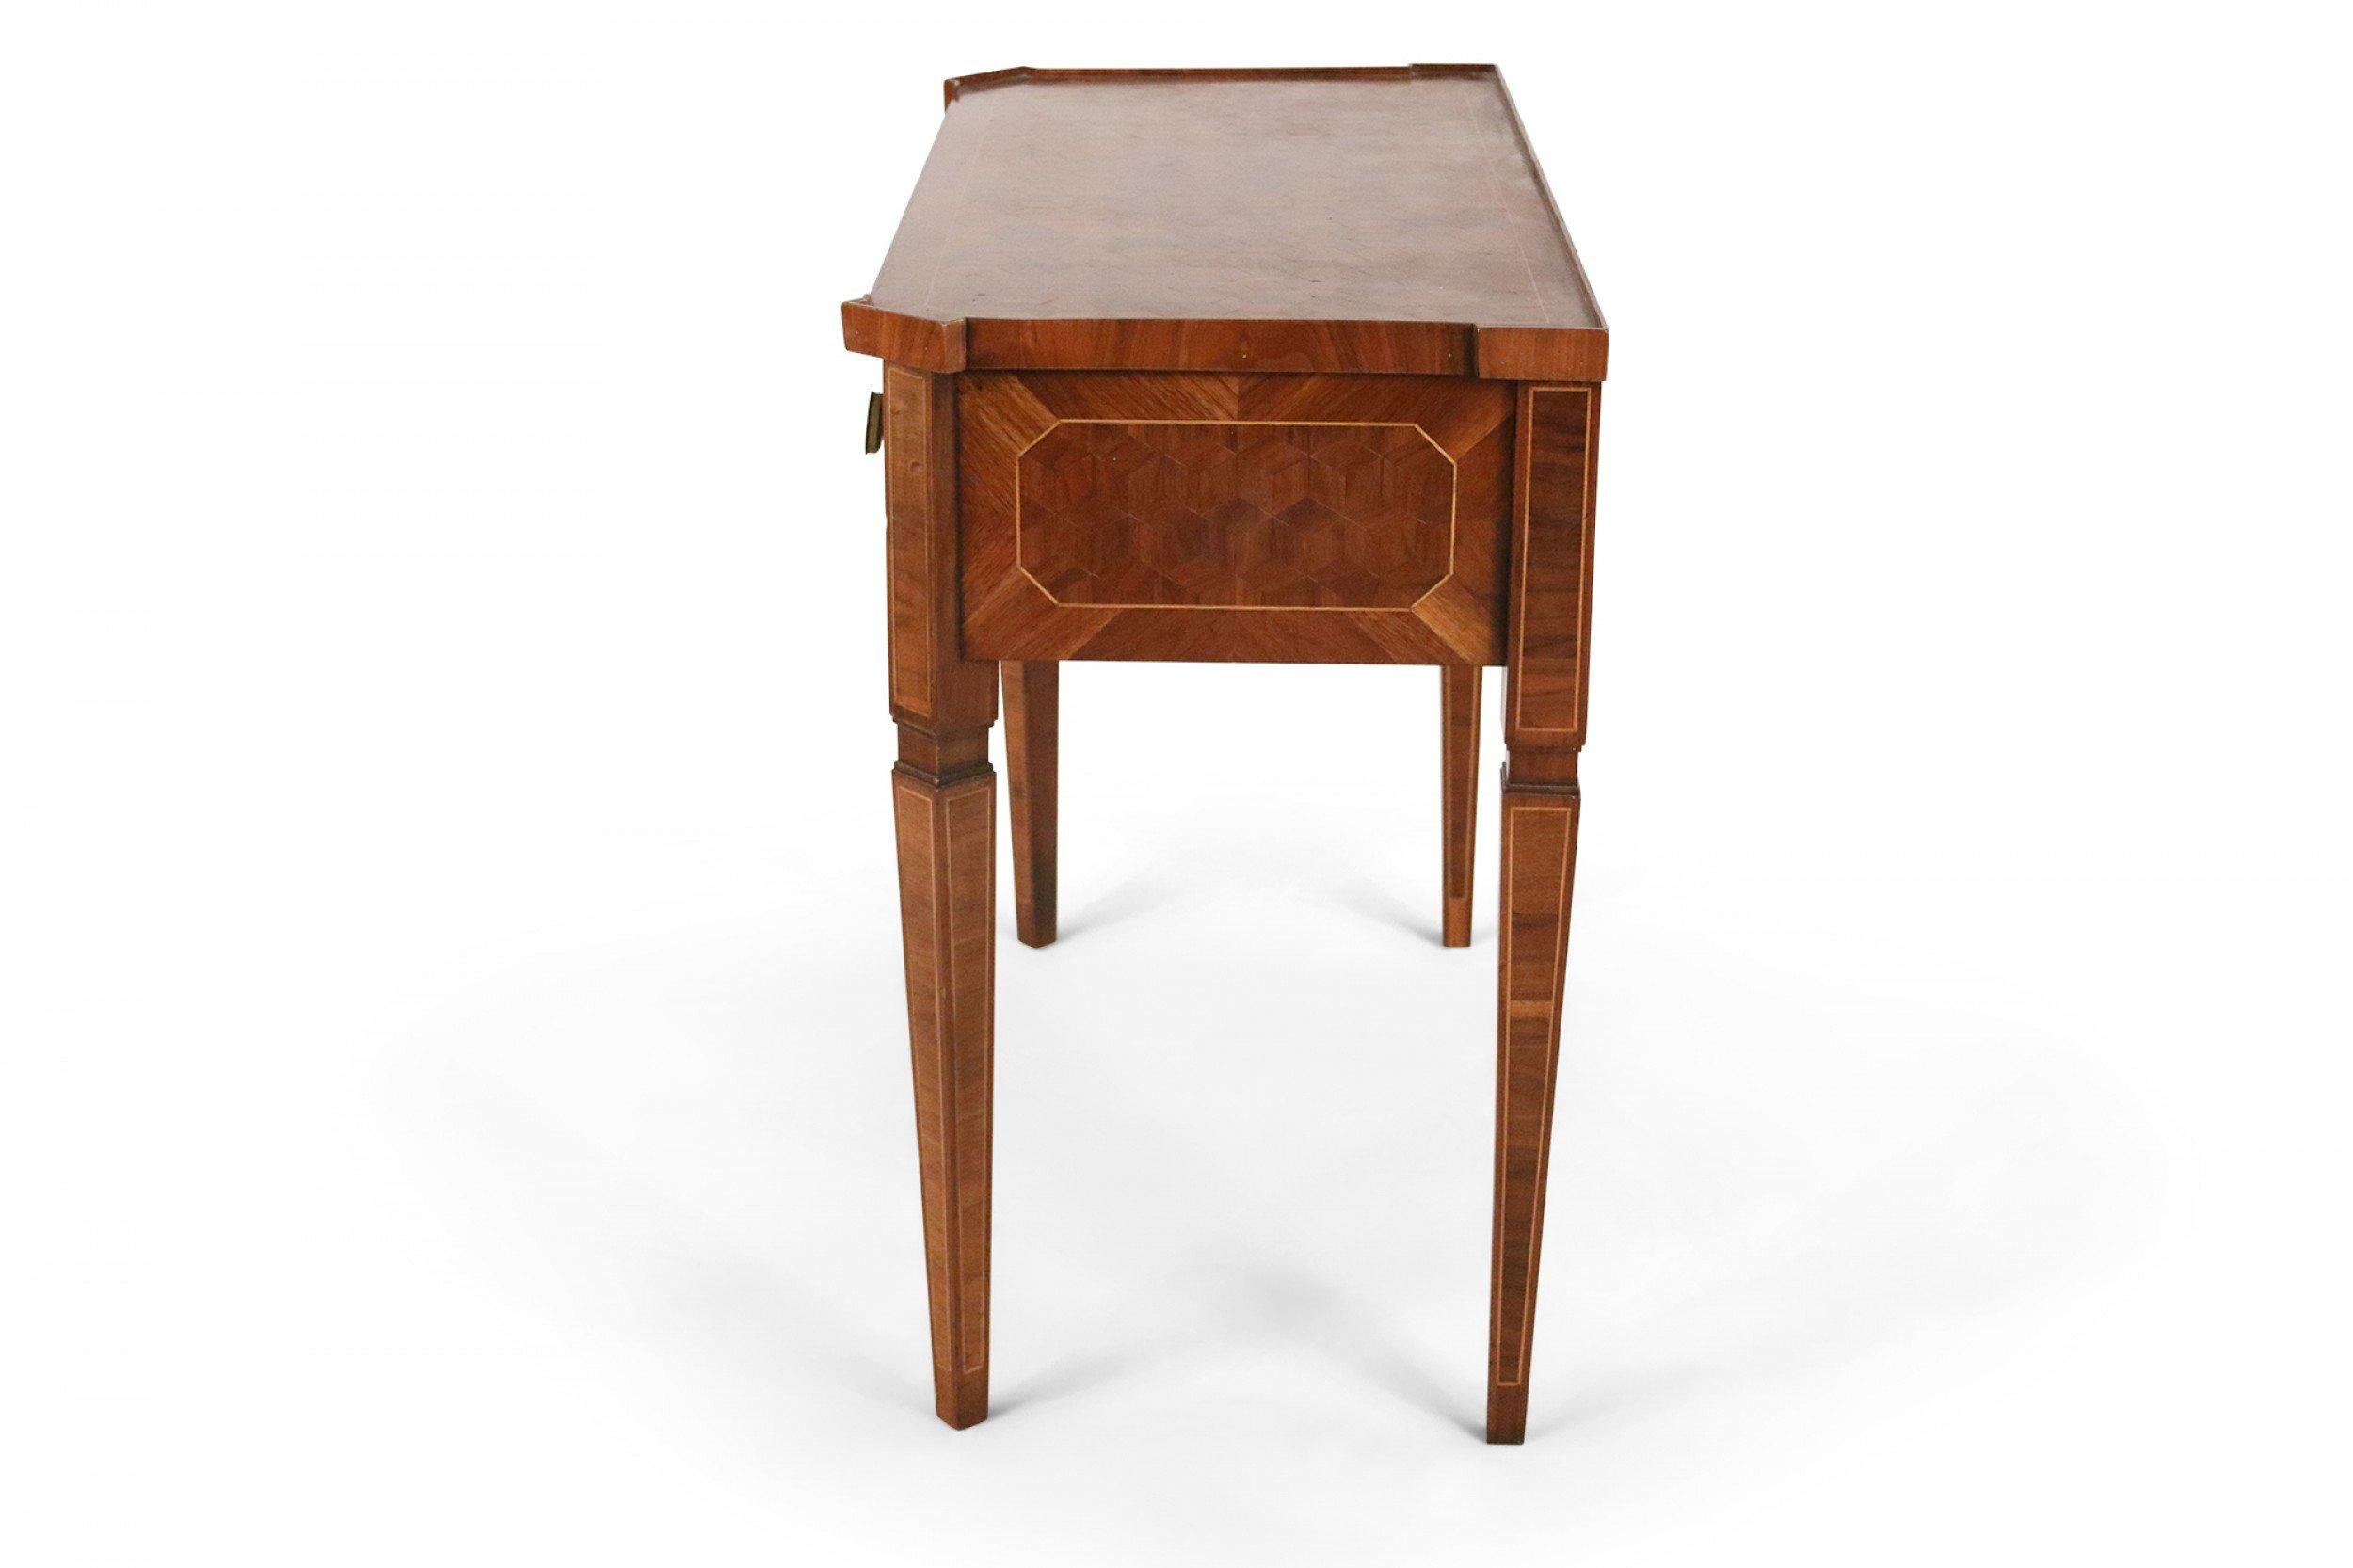 Continental German (early 19th century) mahogany console table having a low border top with parquetry veneer, single drawer with two brass drawer pulls, with four tapered square legs.